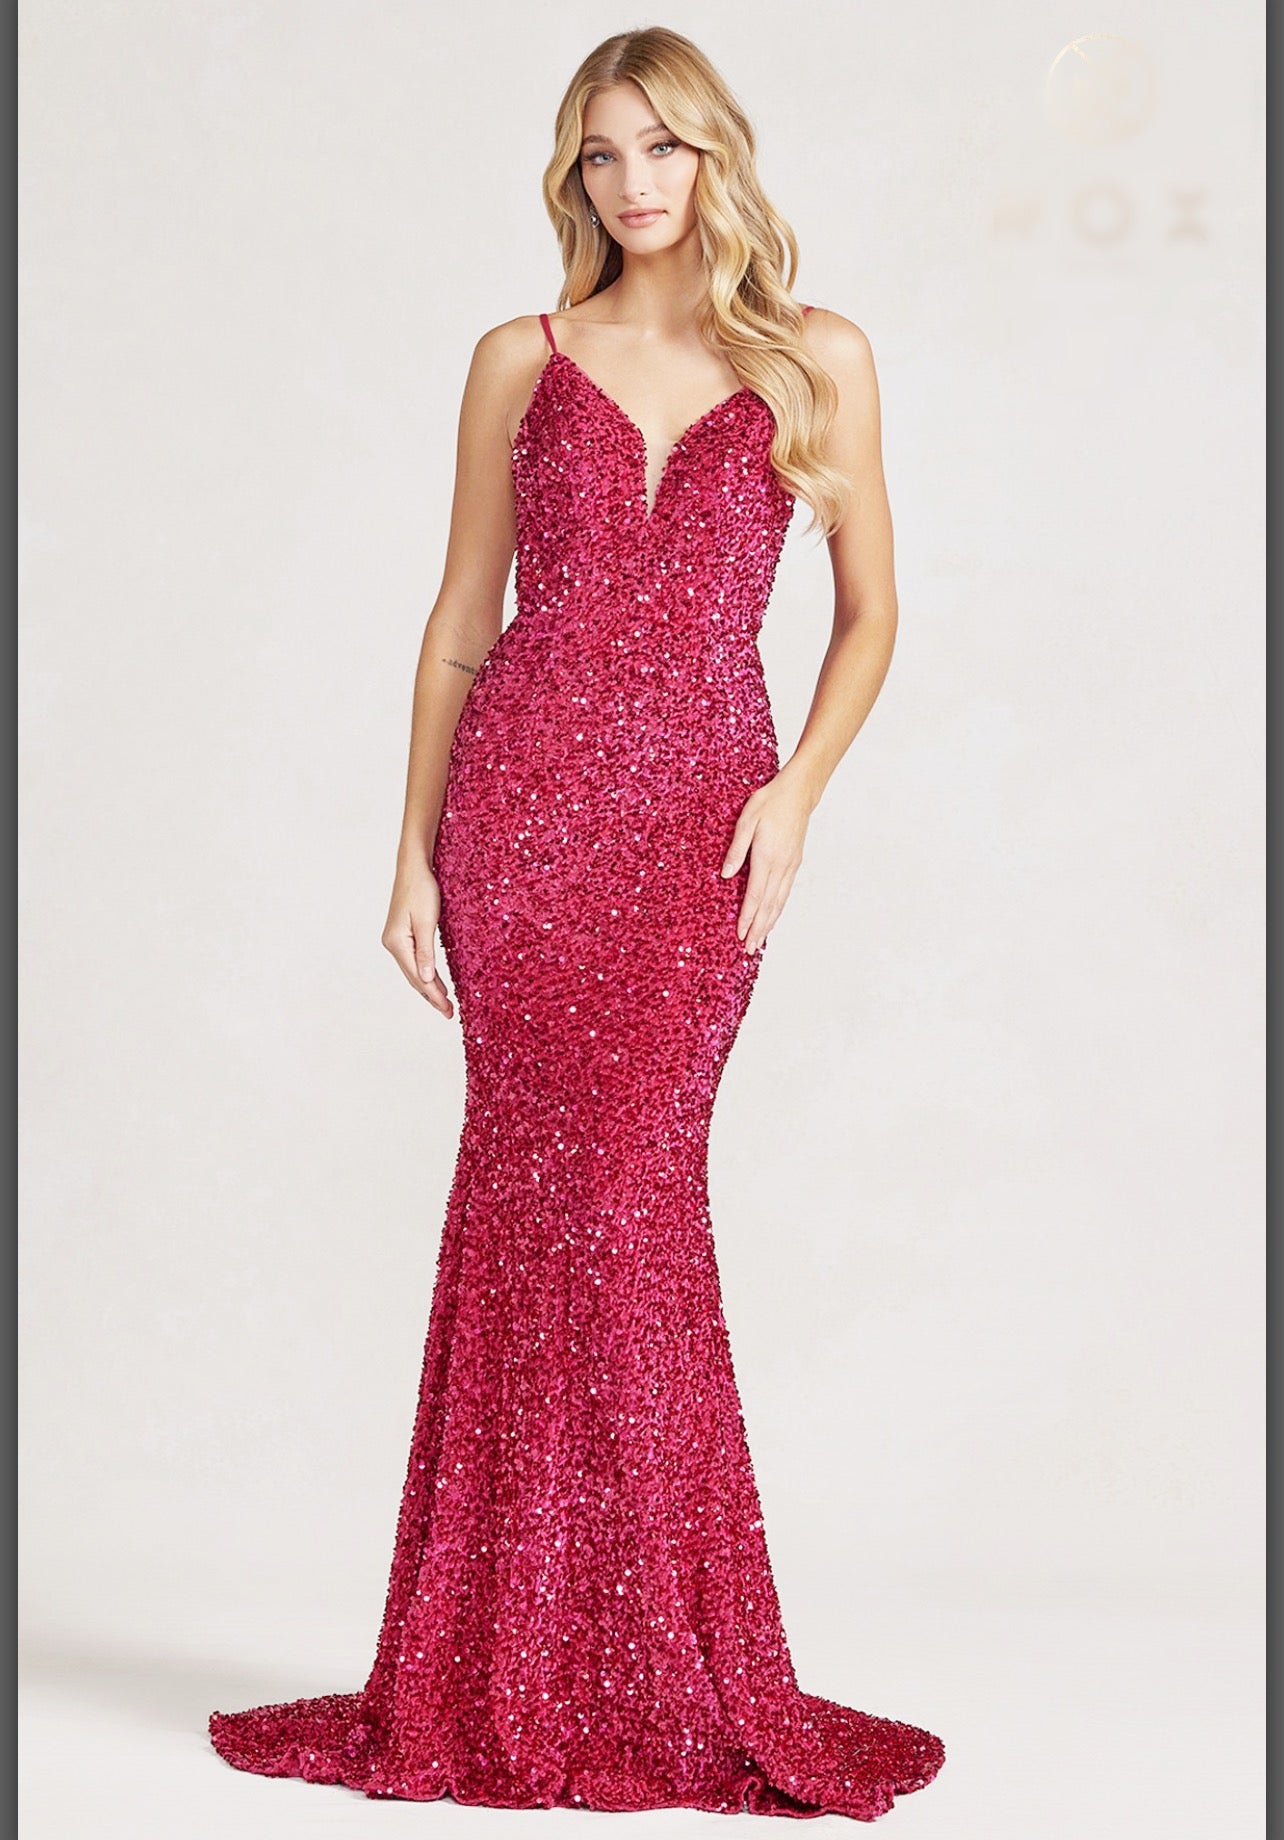 Fuchsia-Sequin Mermaid Gown with Intricate Detailing